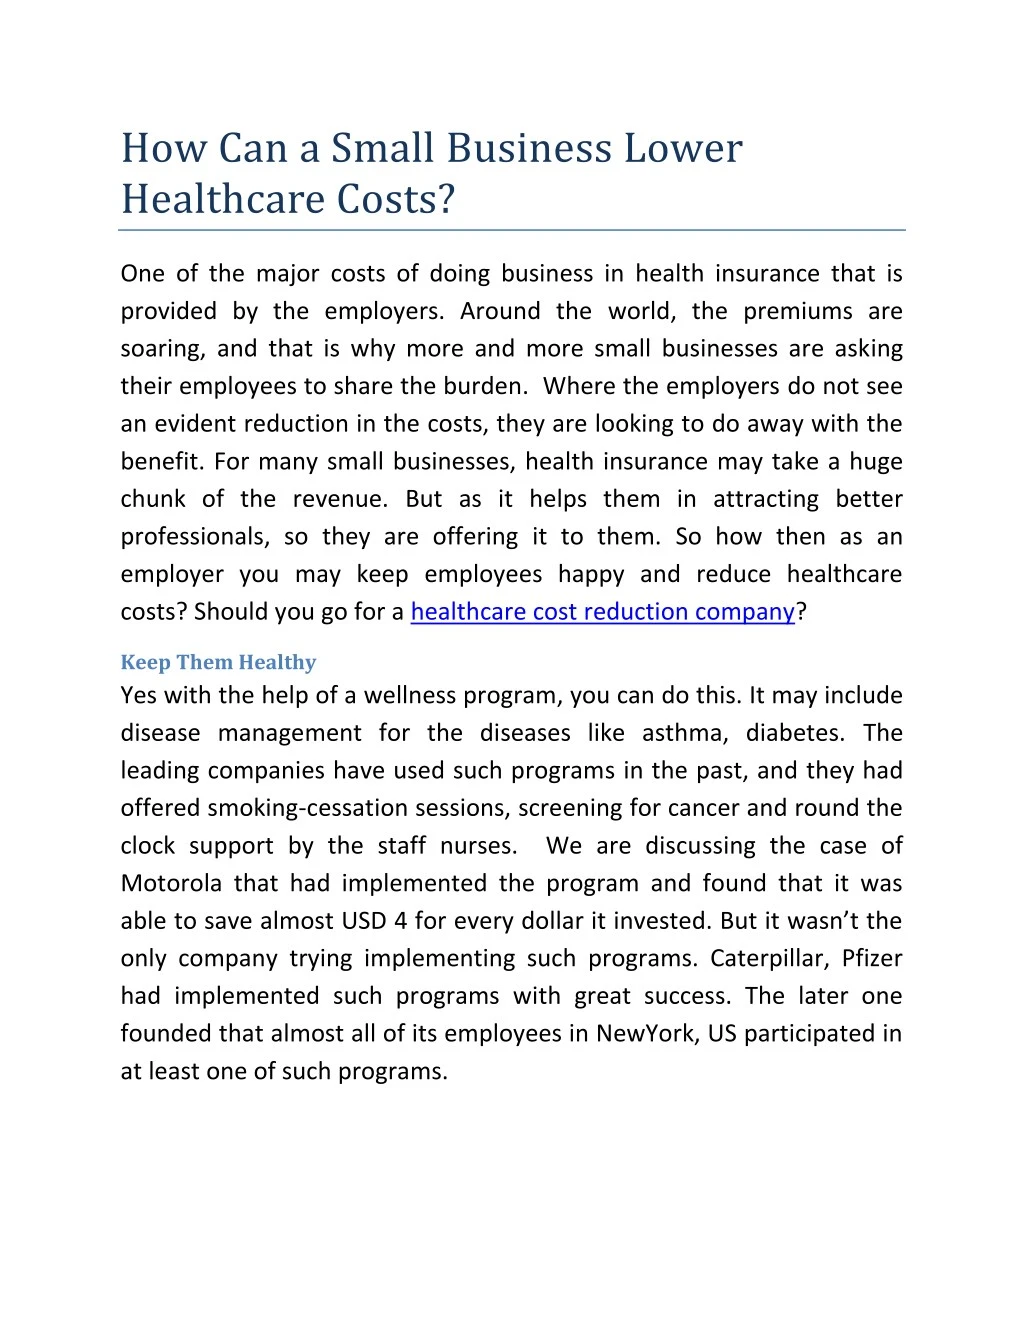 how can a small business lower healthcare costs